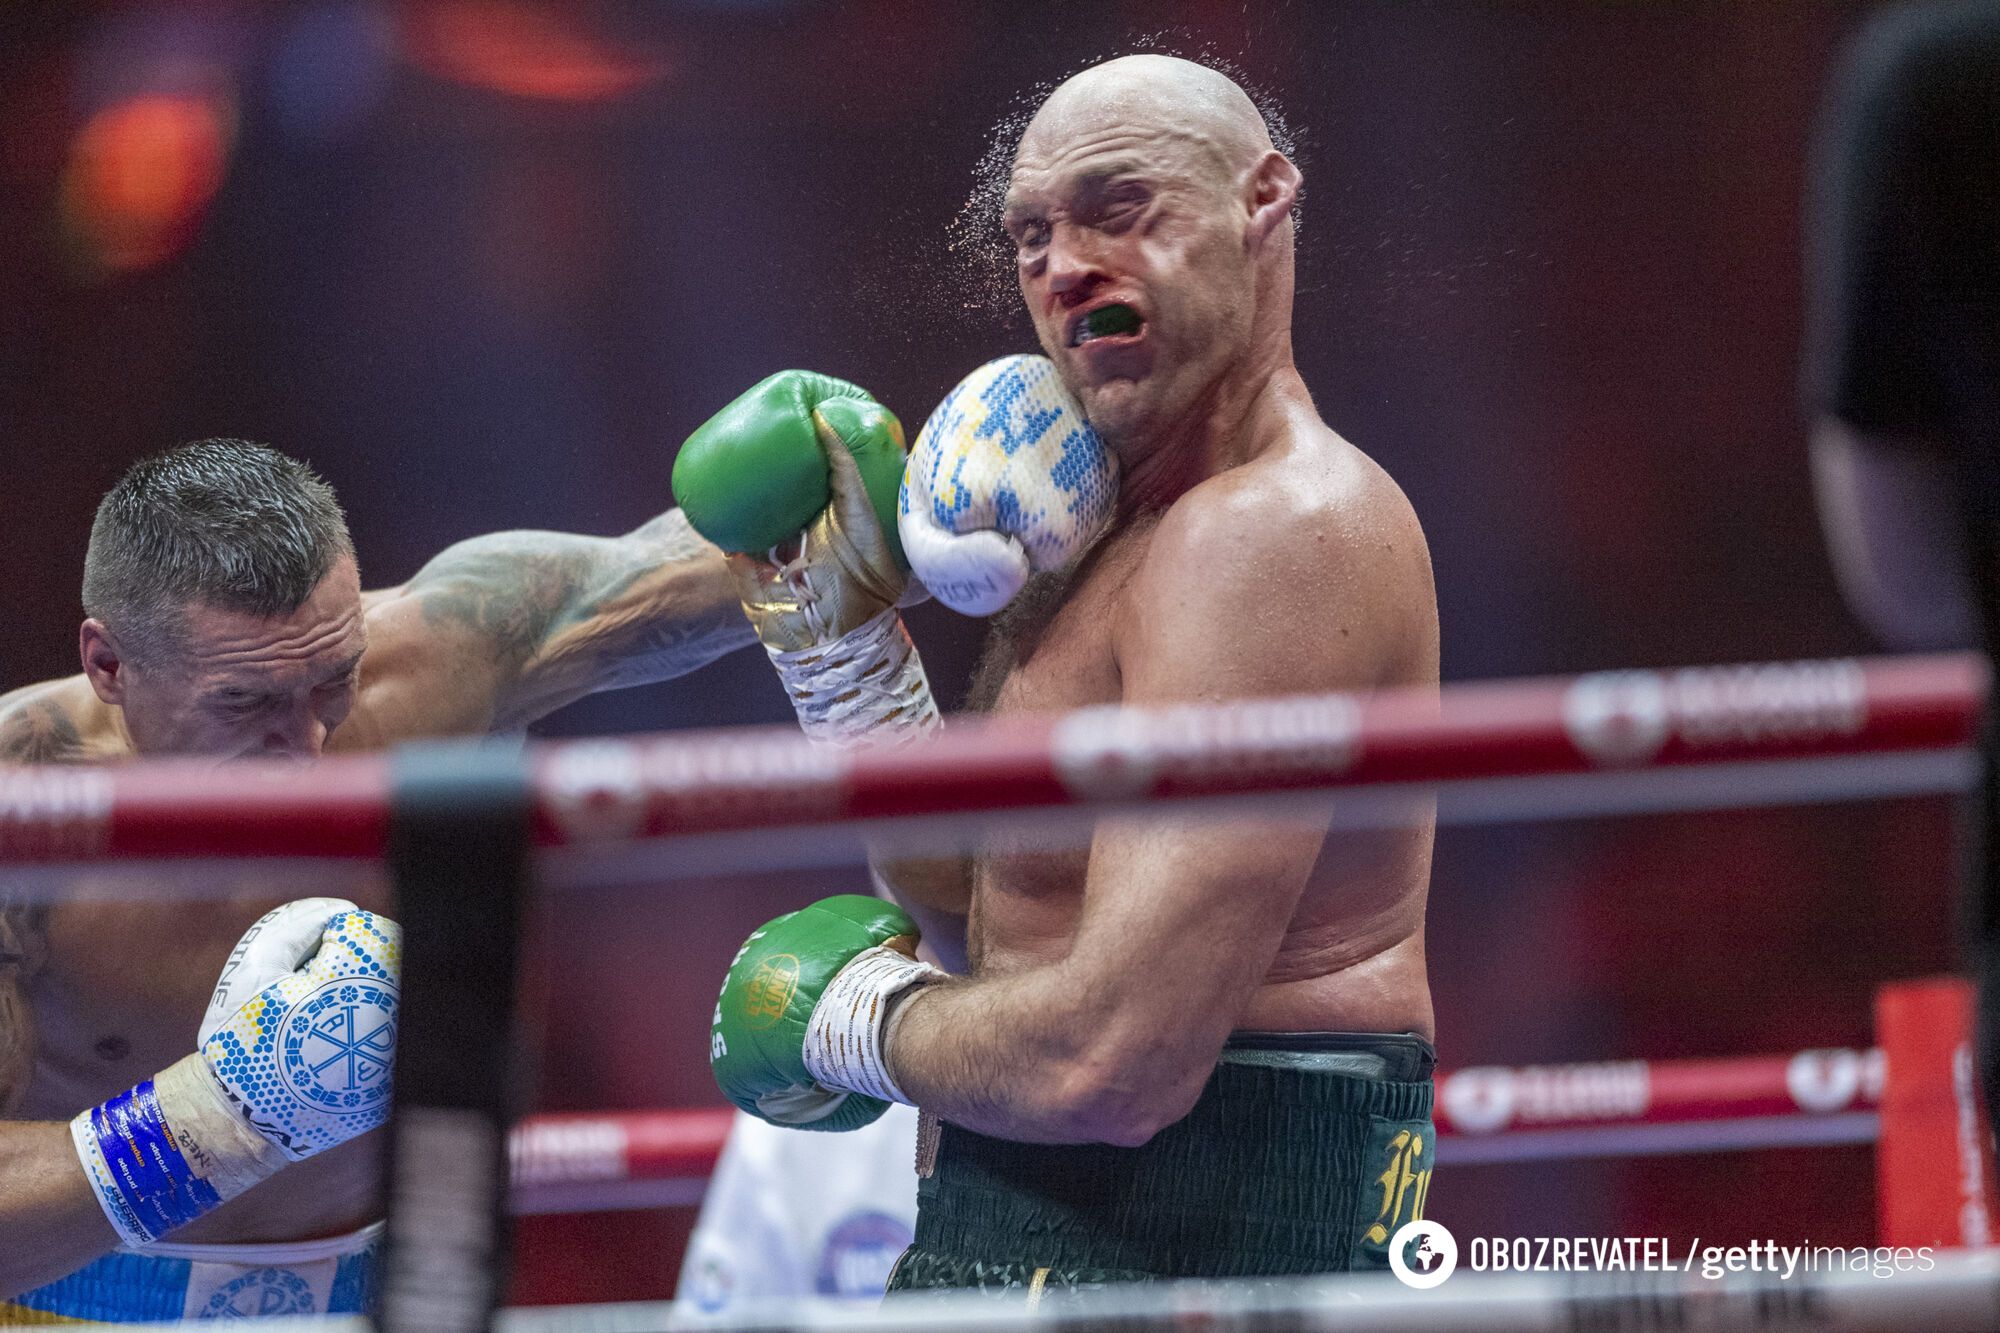 The agreement between Usyk and Fury, under which the Ukrainian will lose the title of absolute world champion, has been revealed